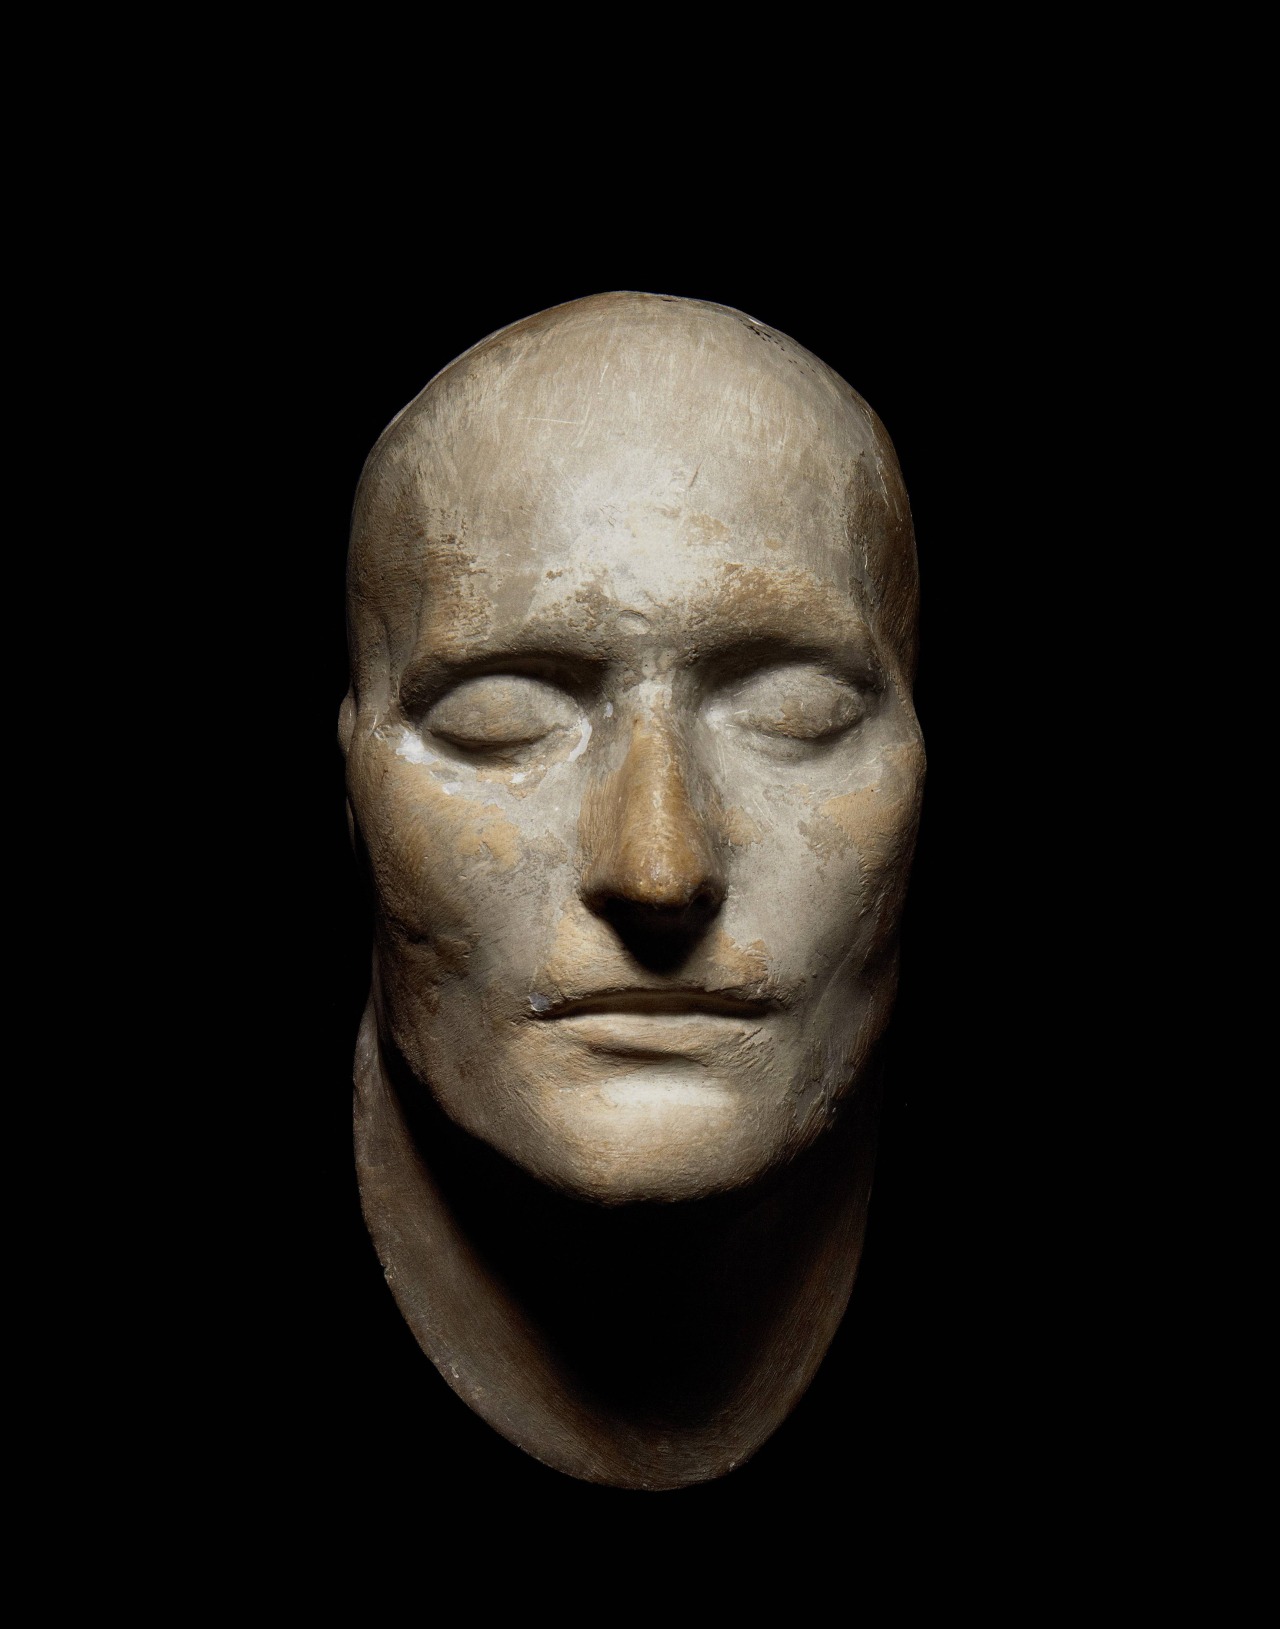 Death mask of Napoleon, taken on the Island of St Helena on 7 May 1821, two days after his death